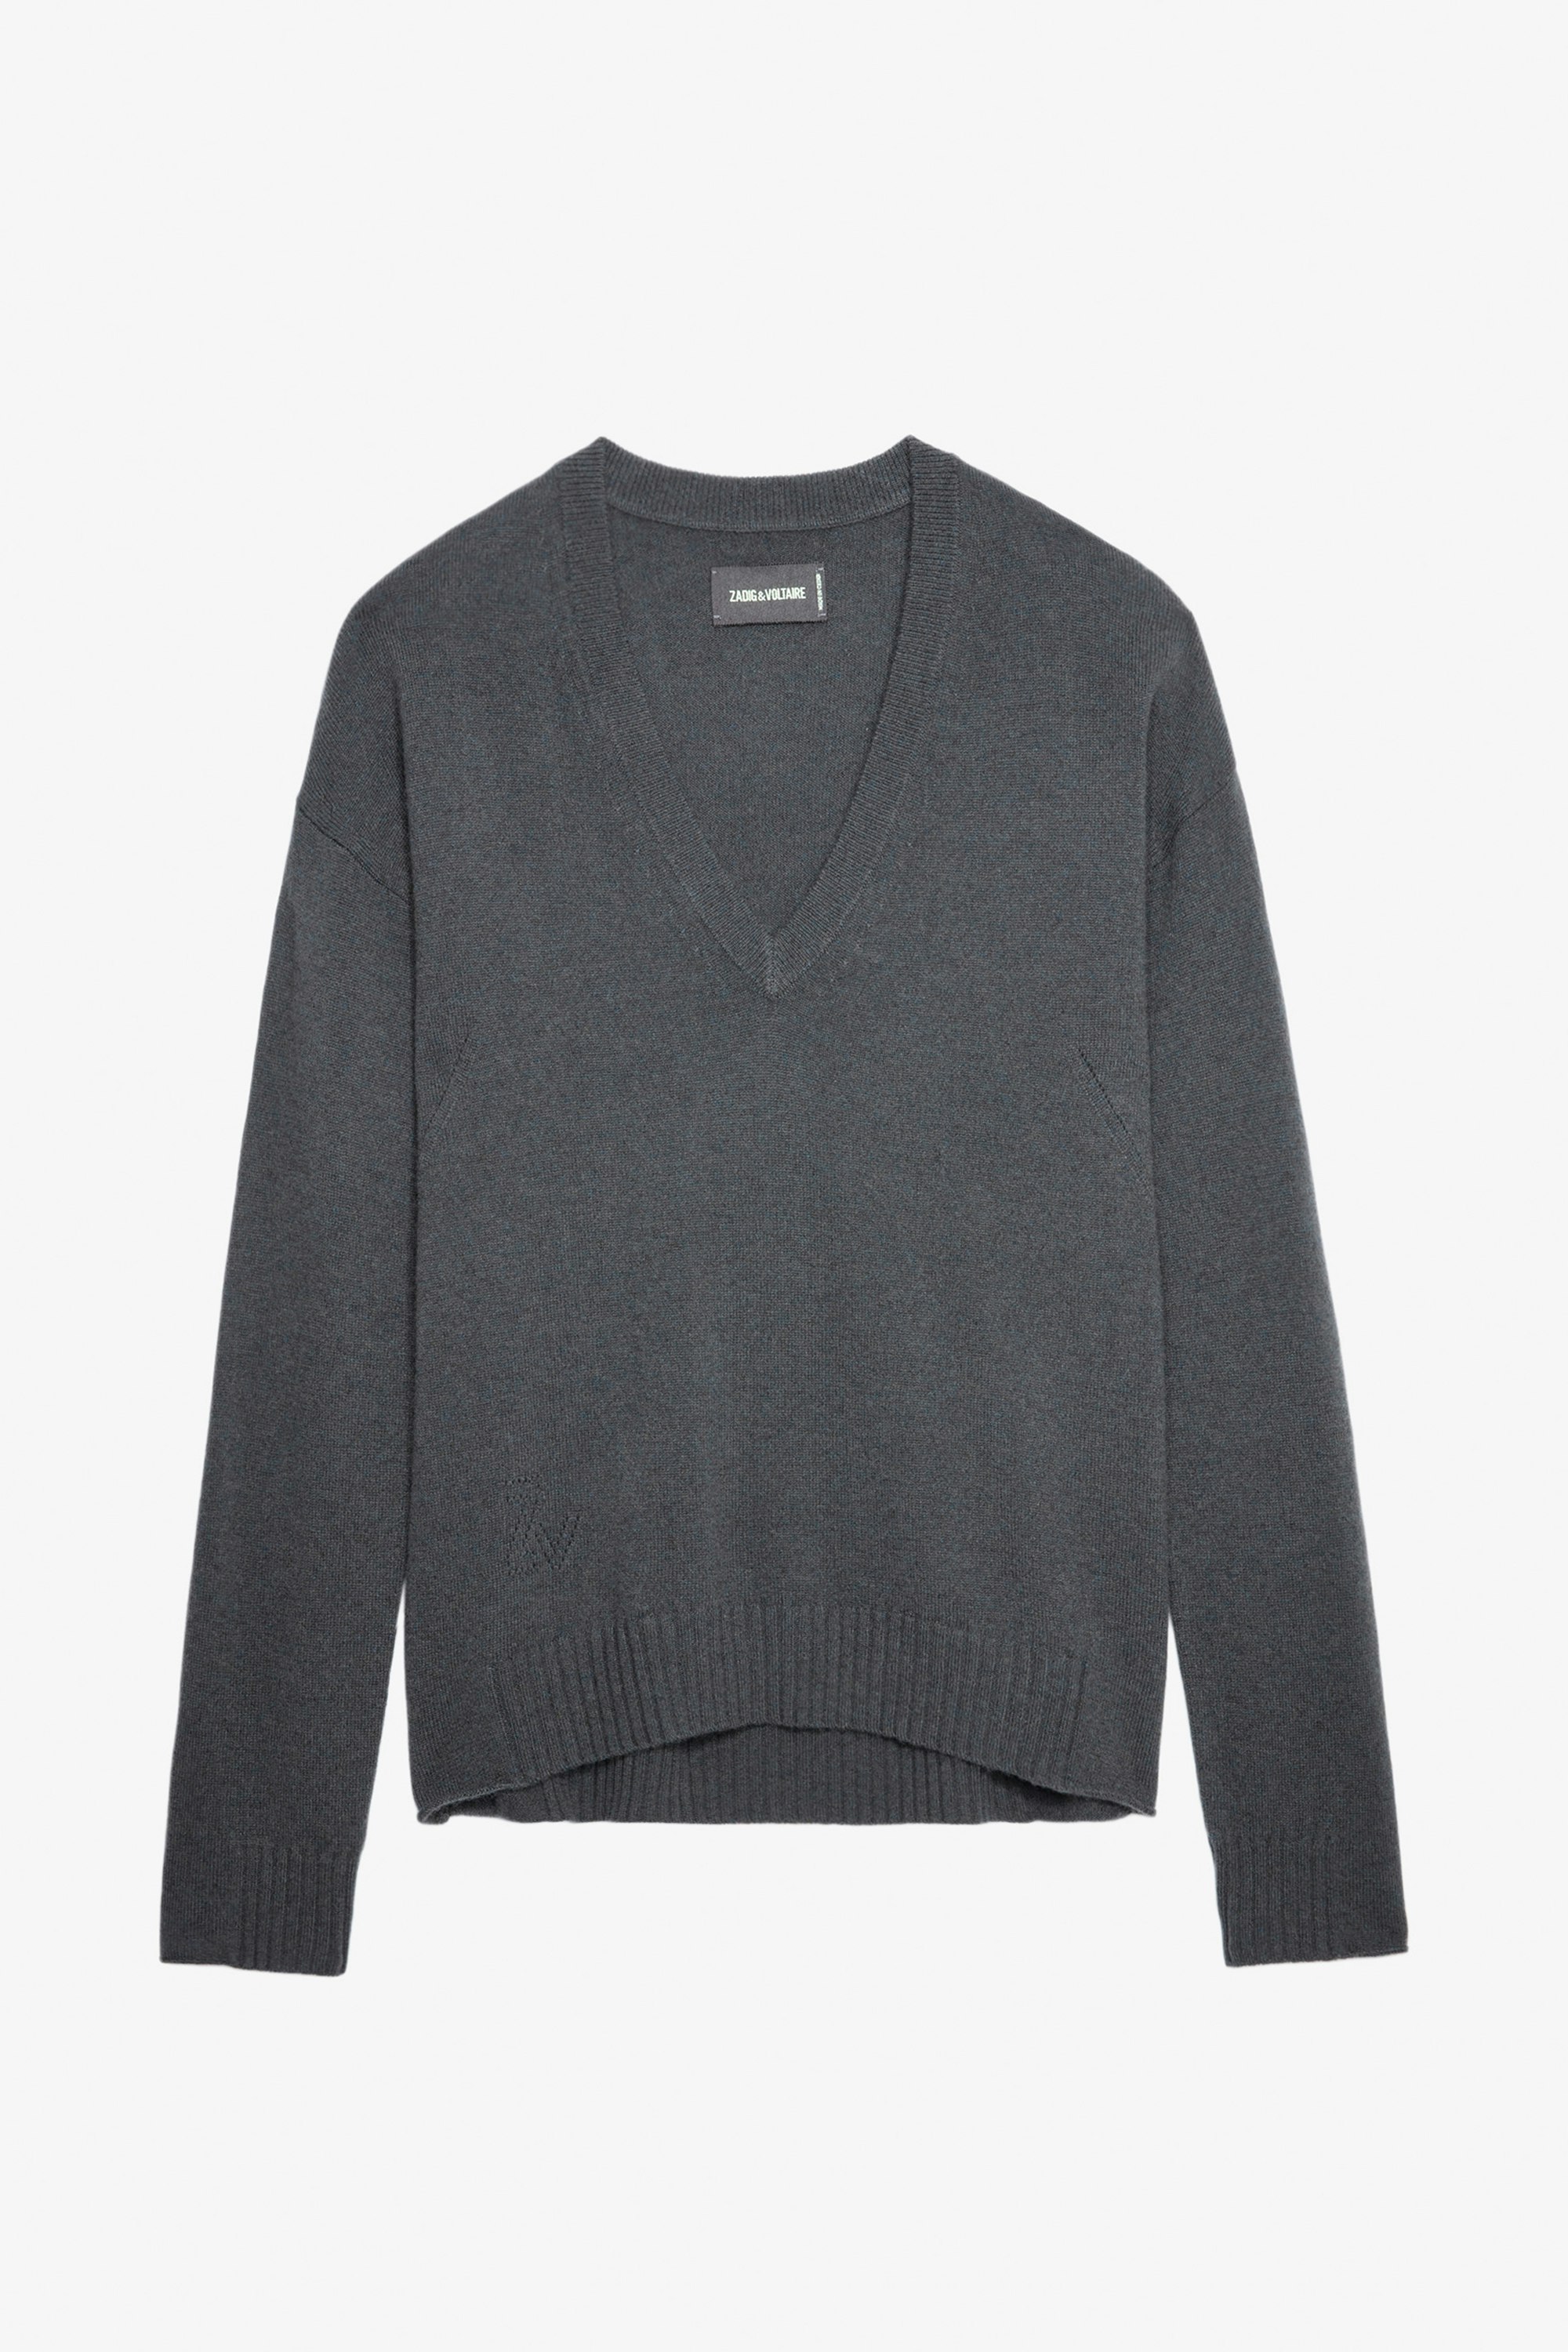 Vivi Patch Cashmere Sweater - Women’s grey cashmere sweater with star patches on the elbows.